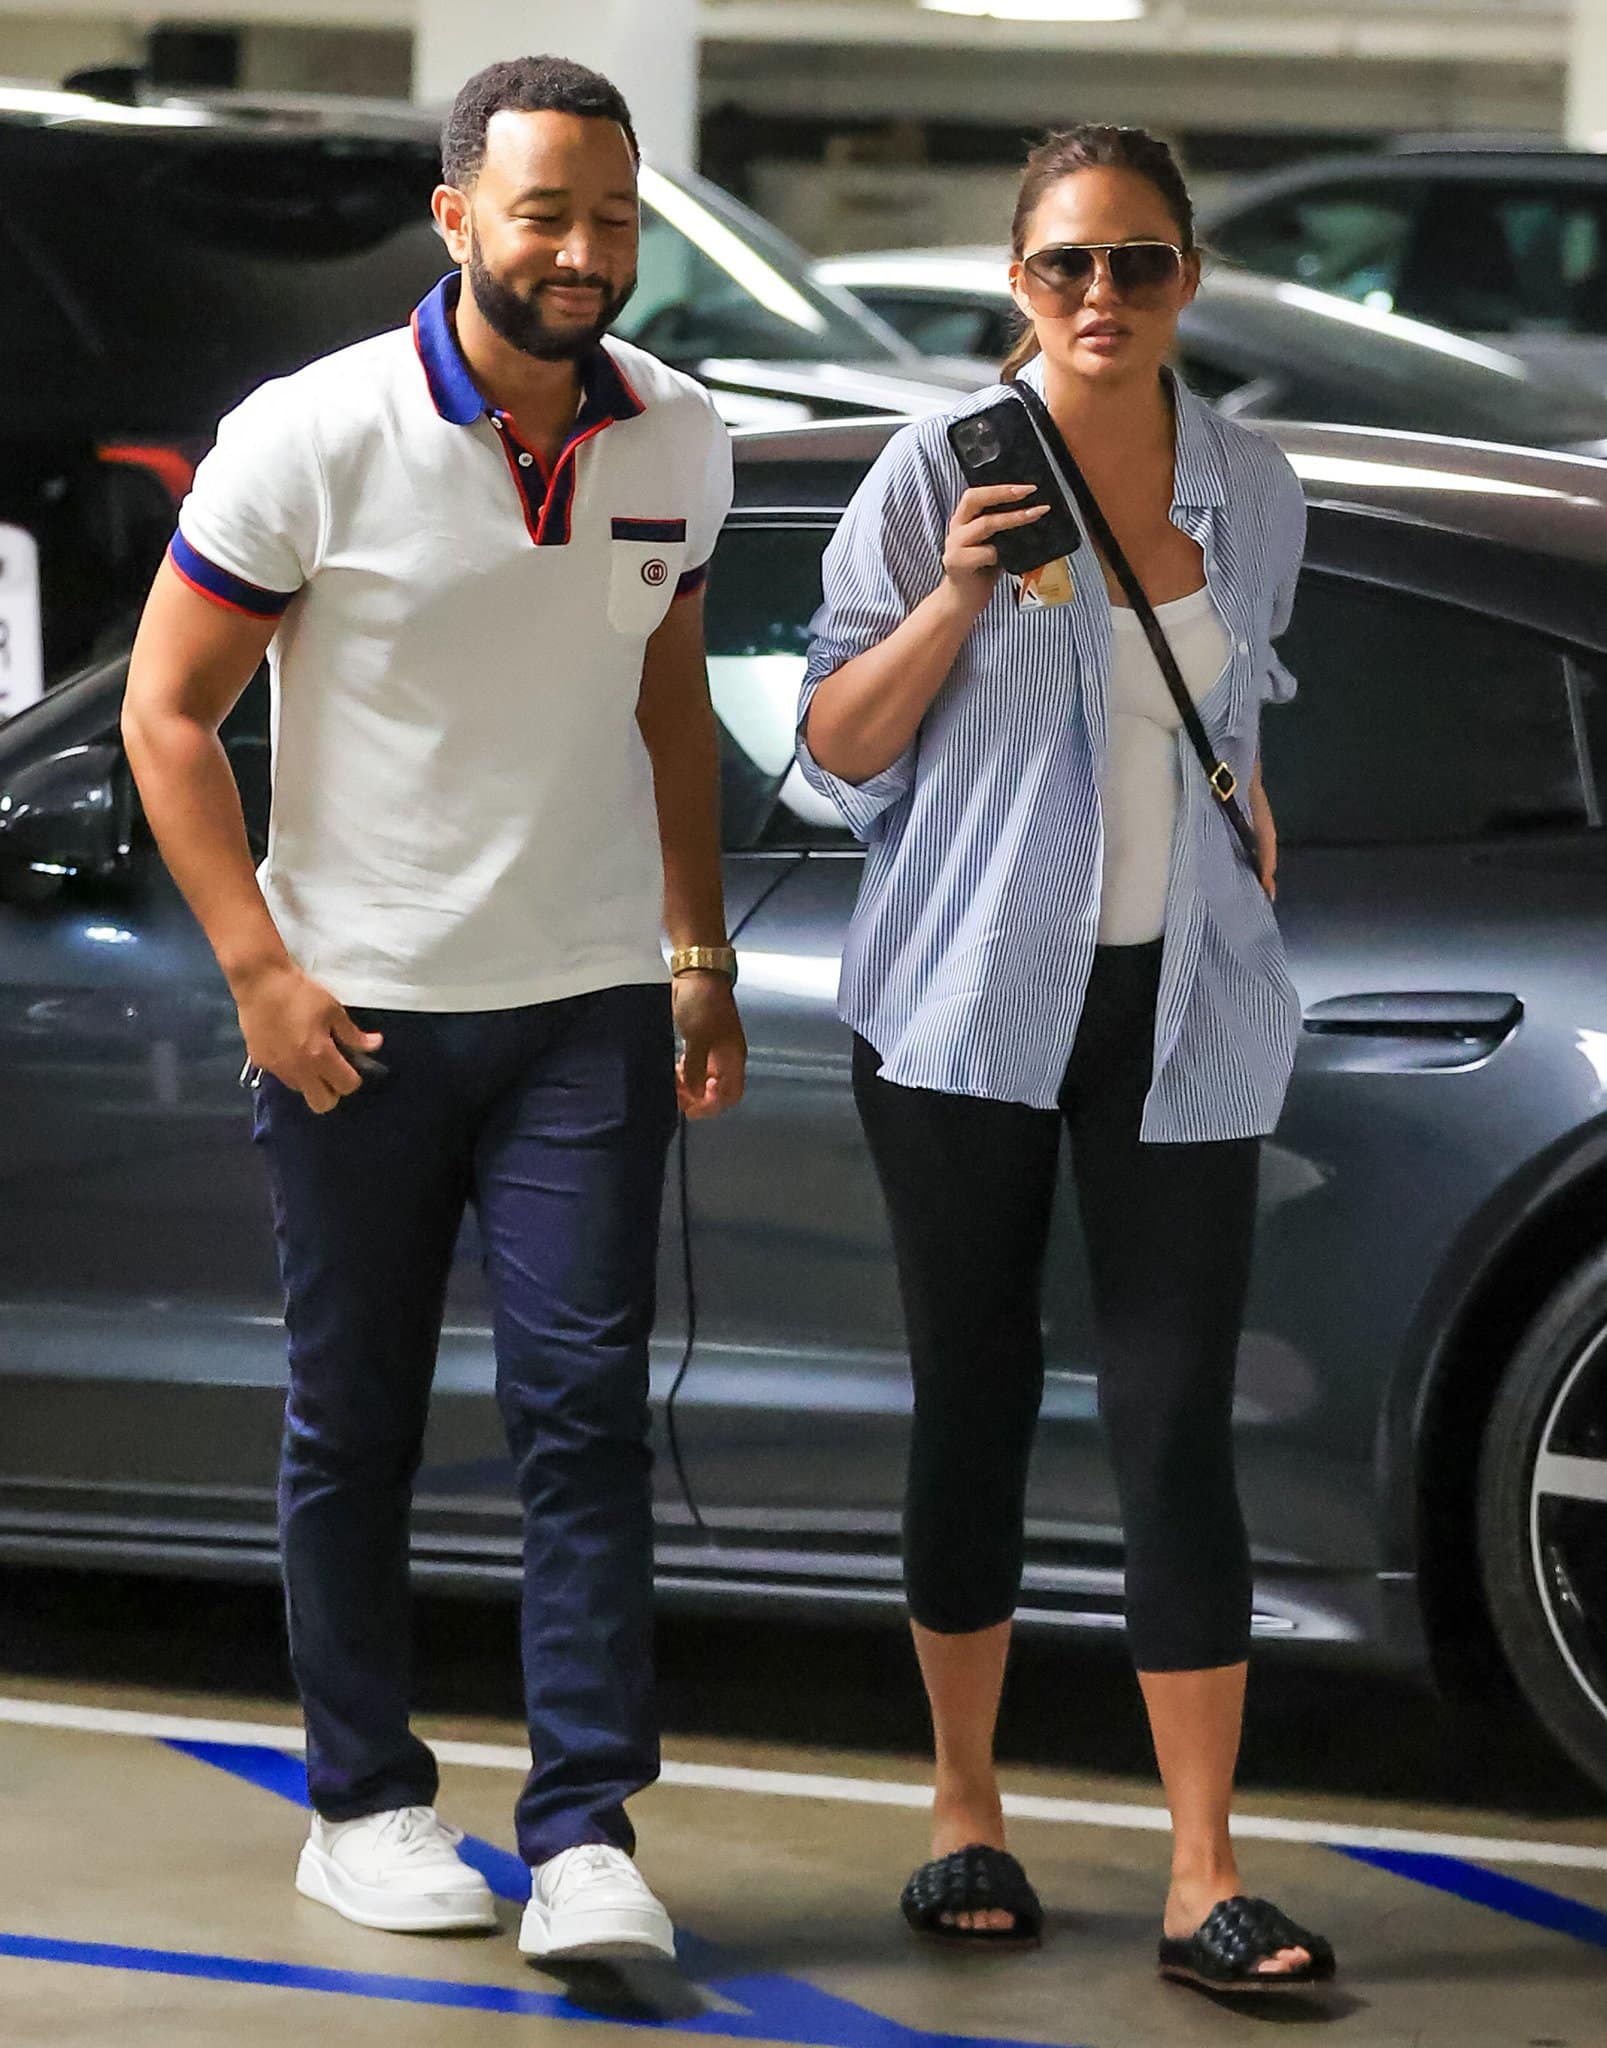 John Legend and Chrissy Teigen wearing casual outfits while heading to an appointment in Los Angeles on August 8, 2022